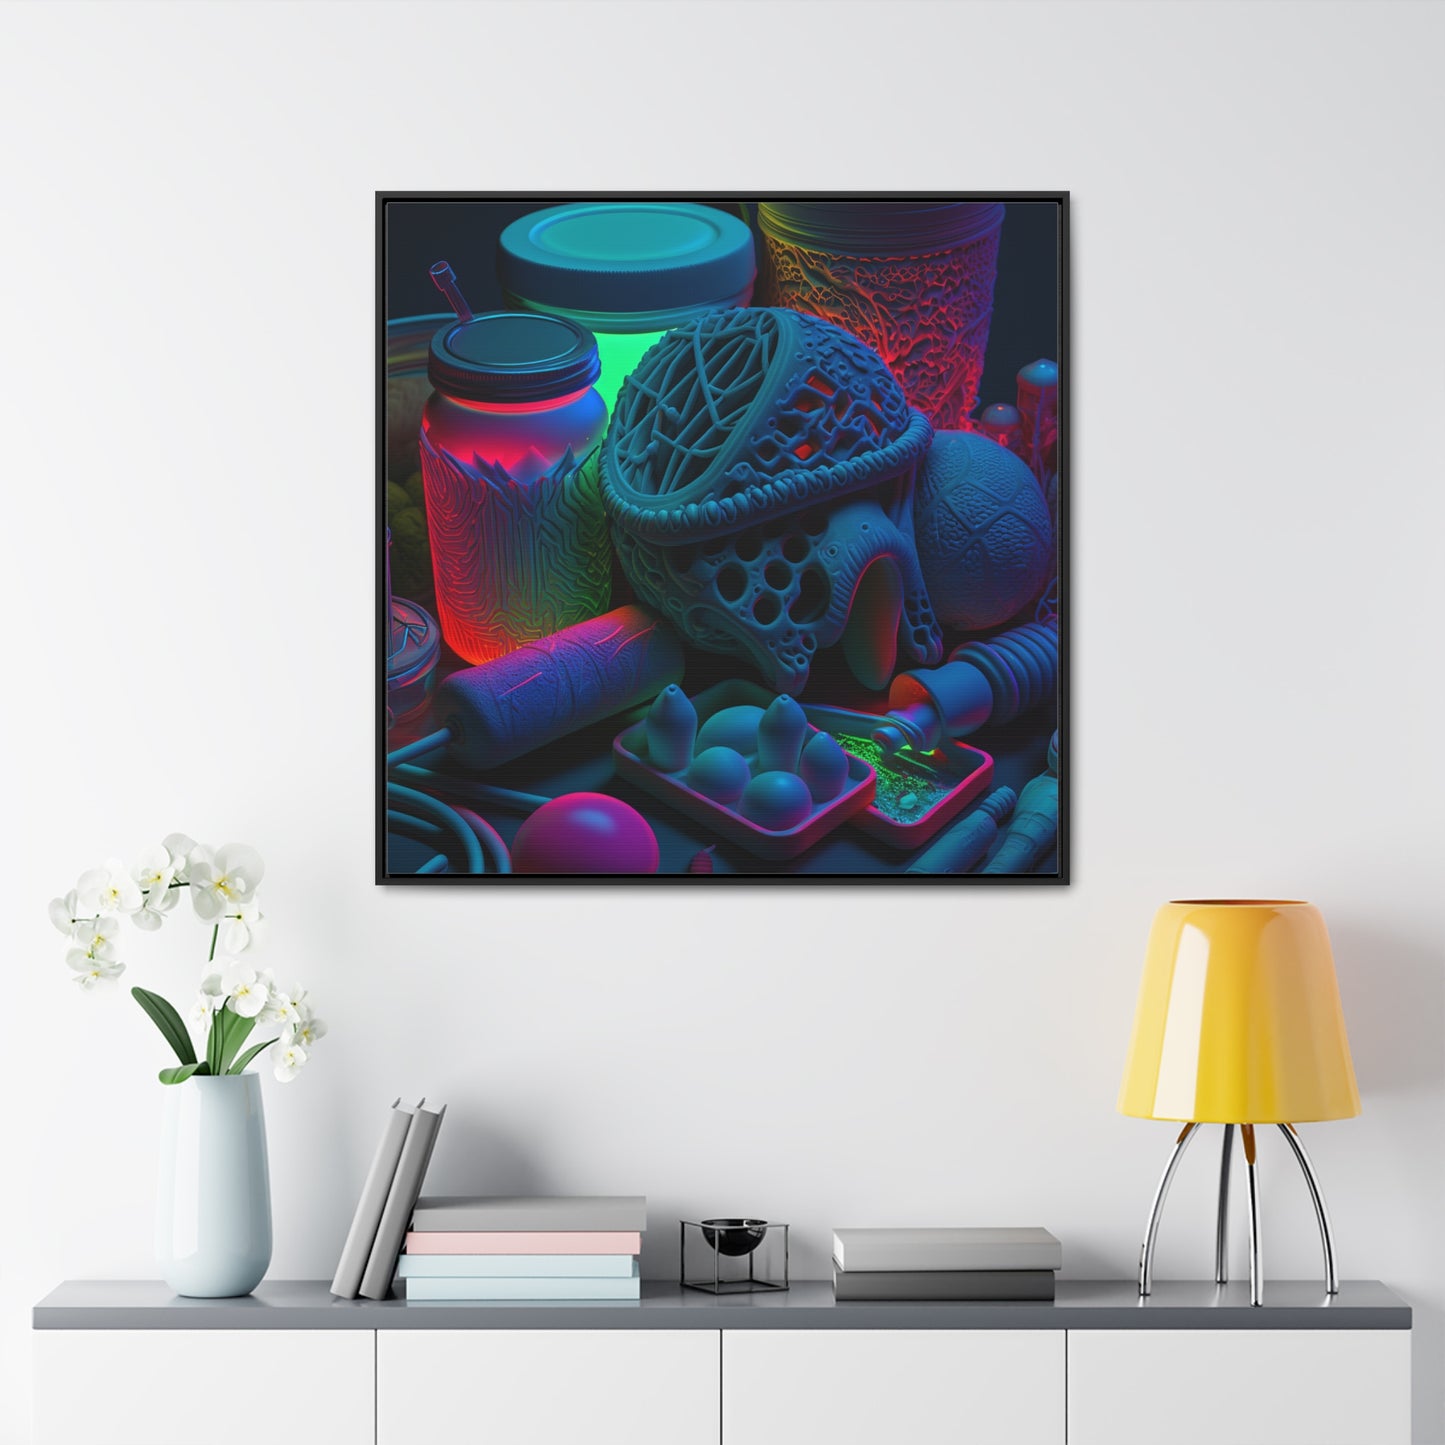 Gallery Canvas Wraps, Square Frame Neon Glow 1